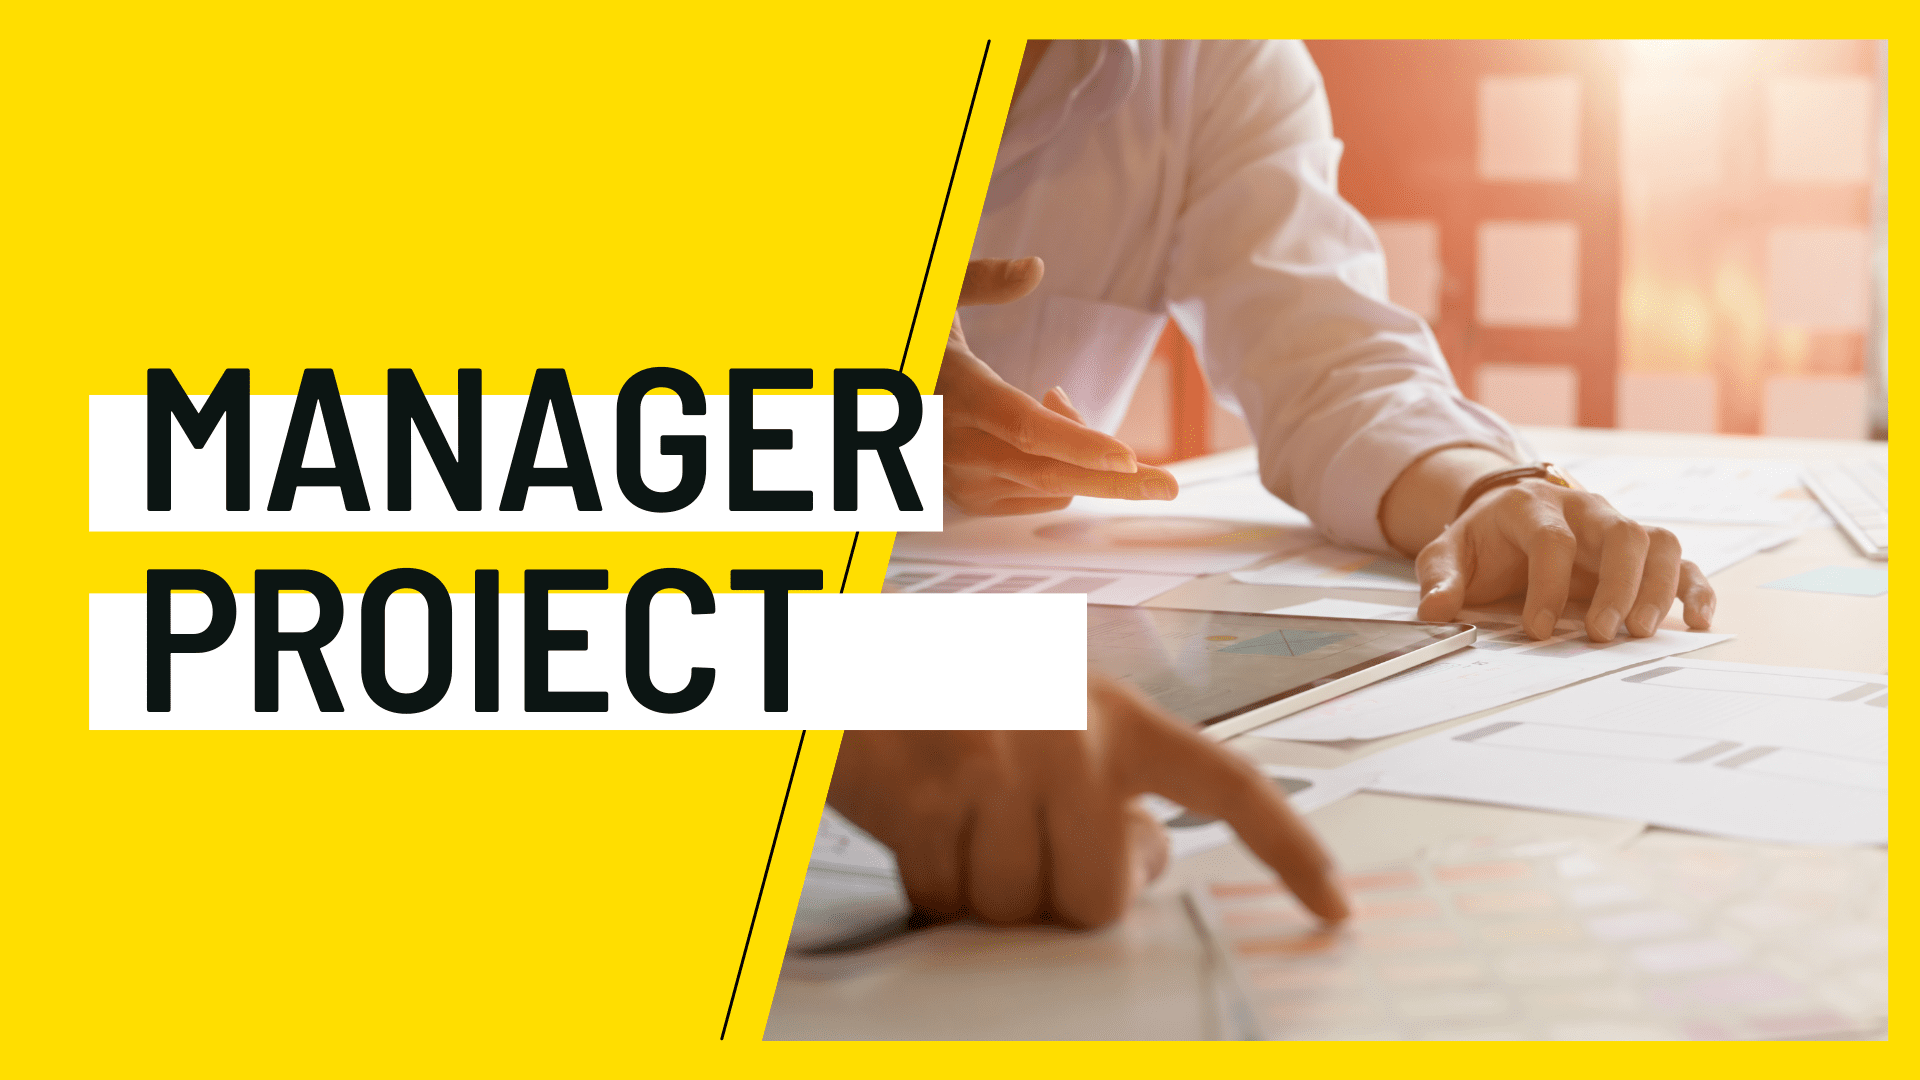 manager proiect